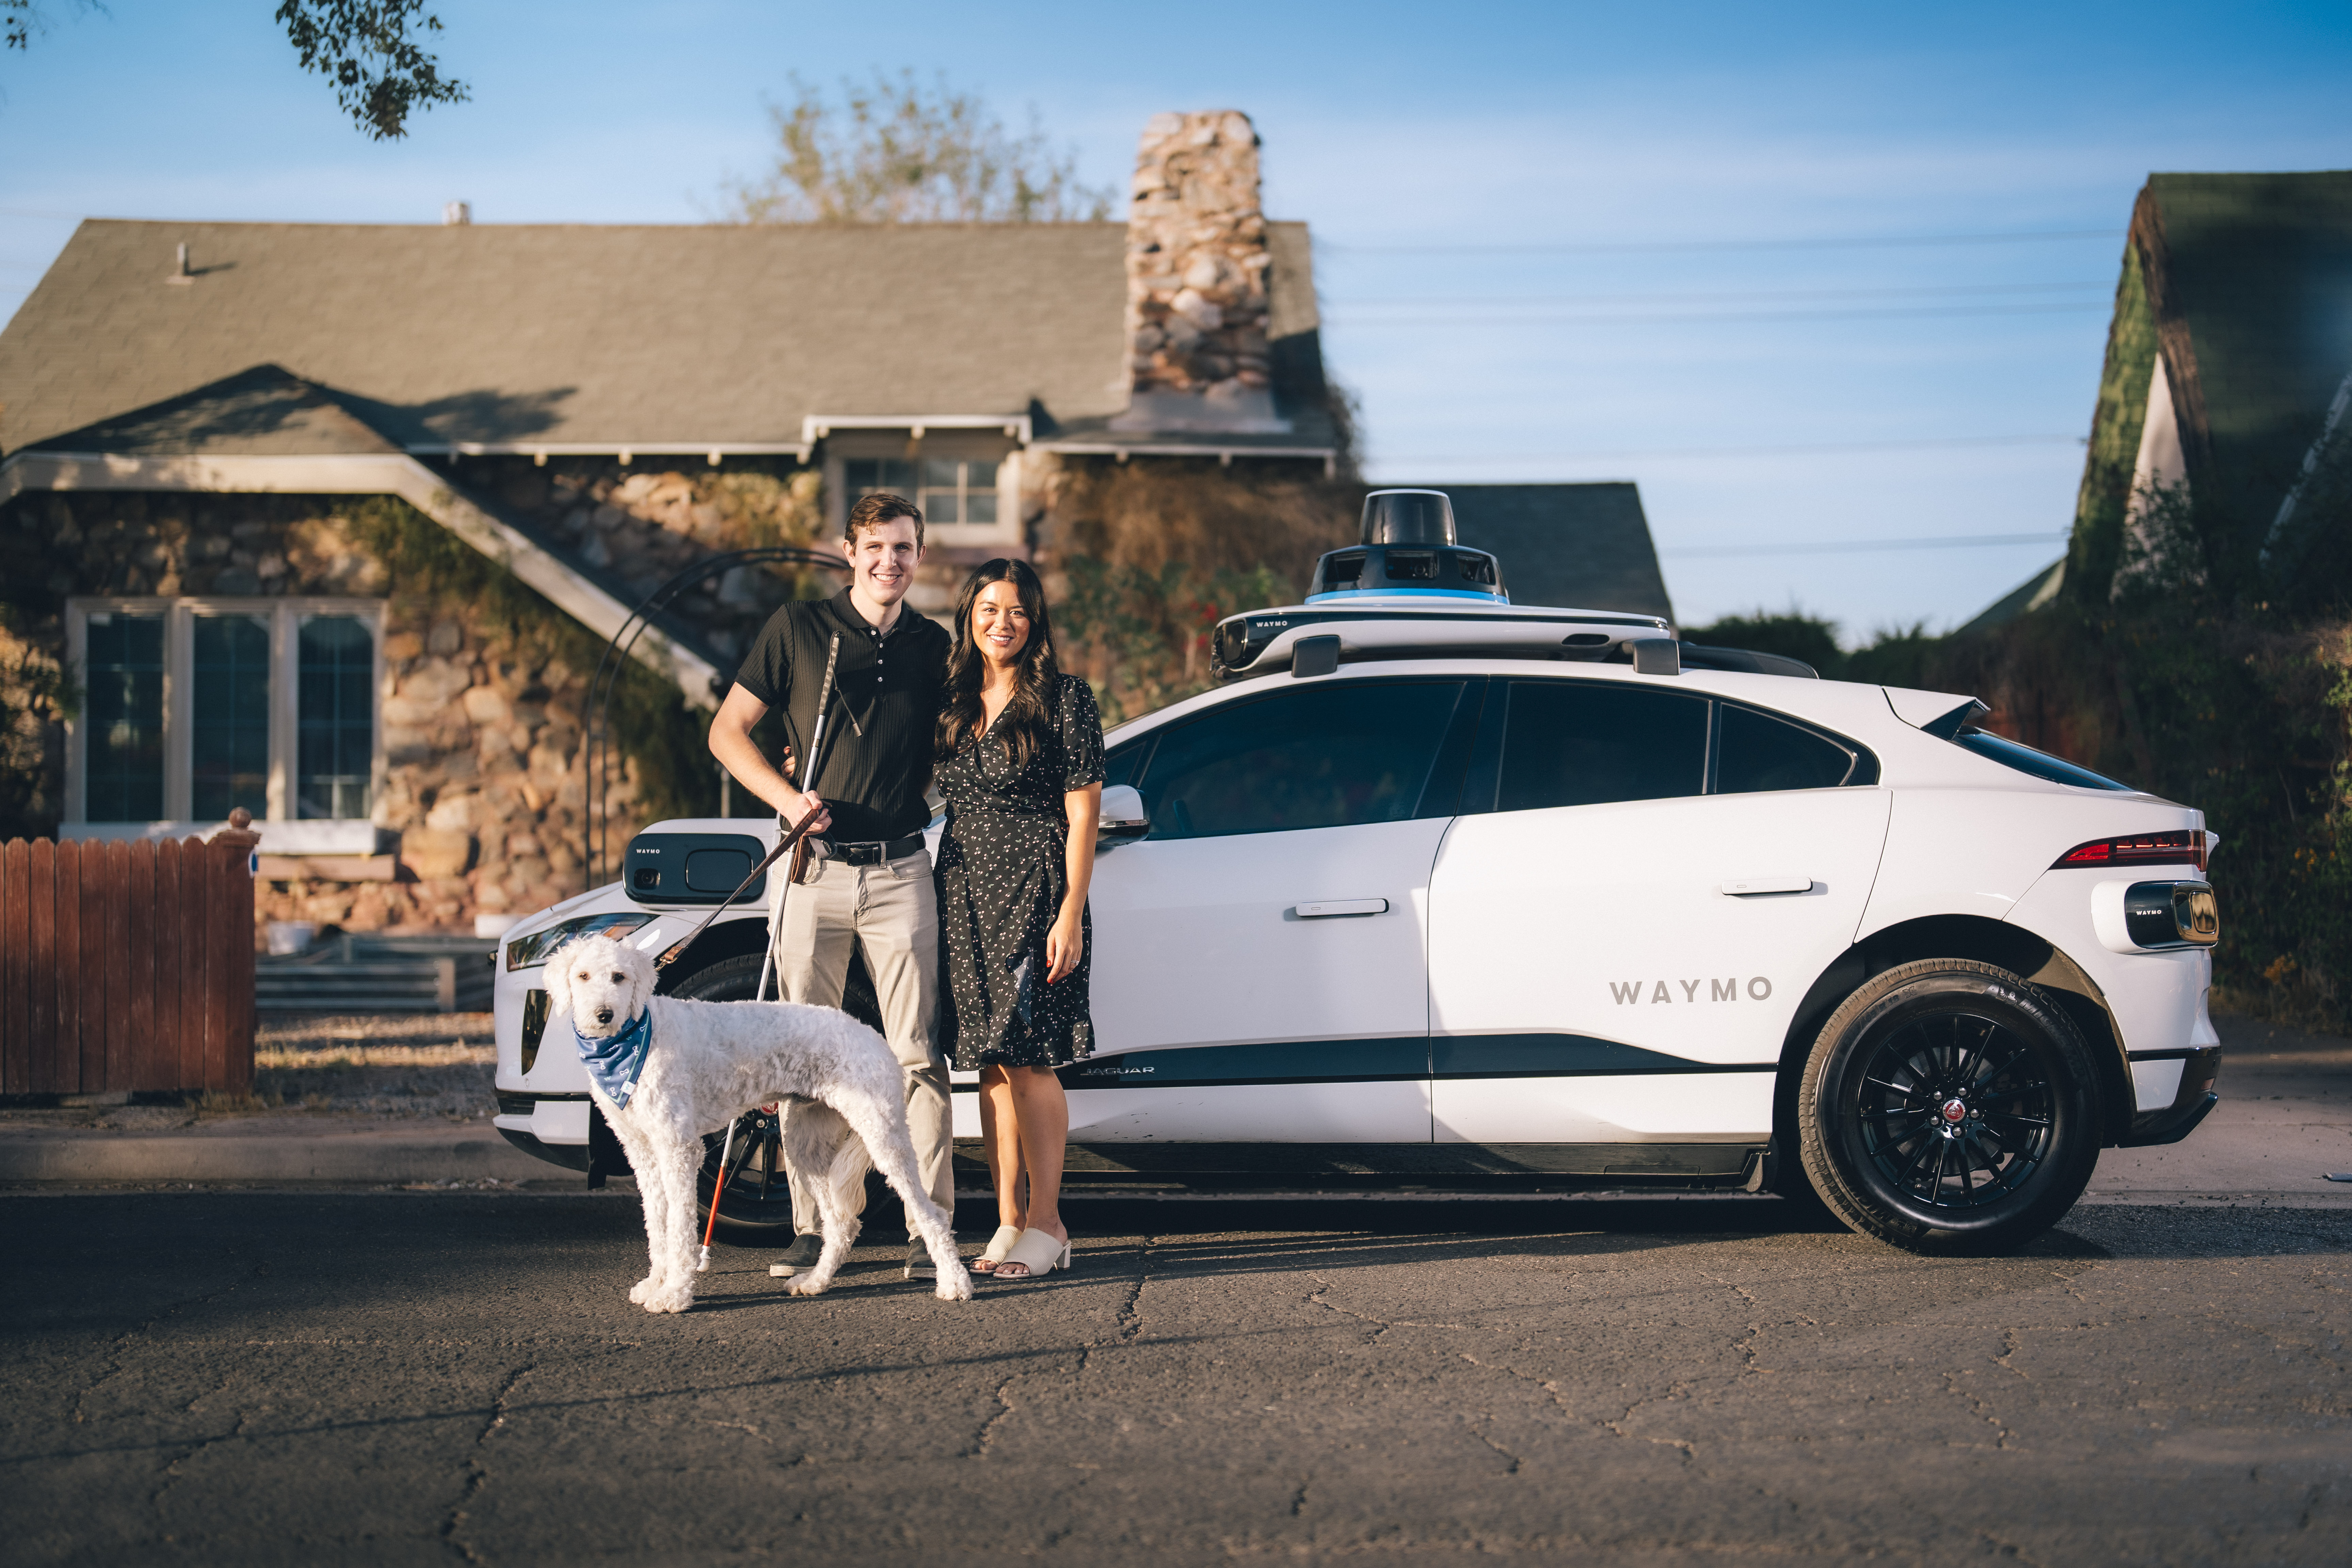 Max and Lilian posing with their dog in front of a Waymo One autonomous ride-hailing vehicle